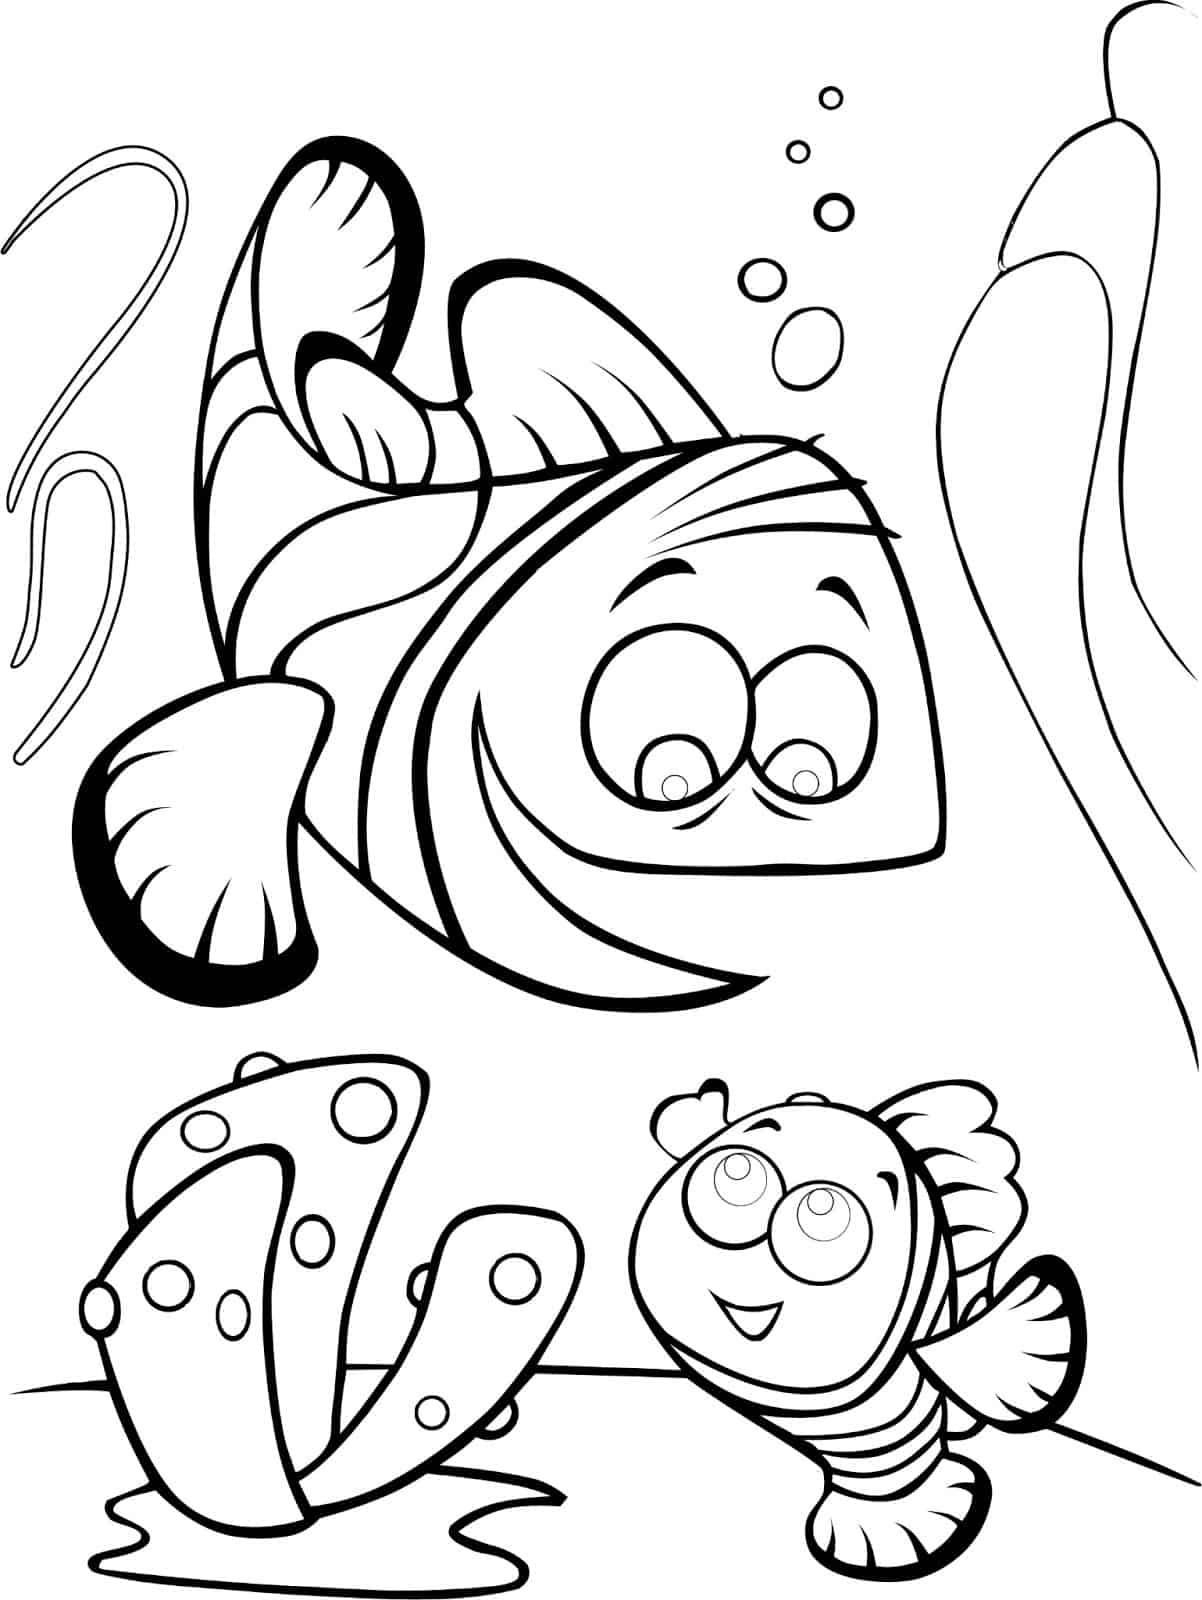 Coloring Pages Of Finding Nemo